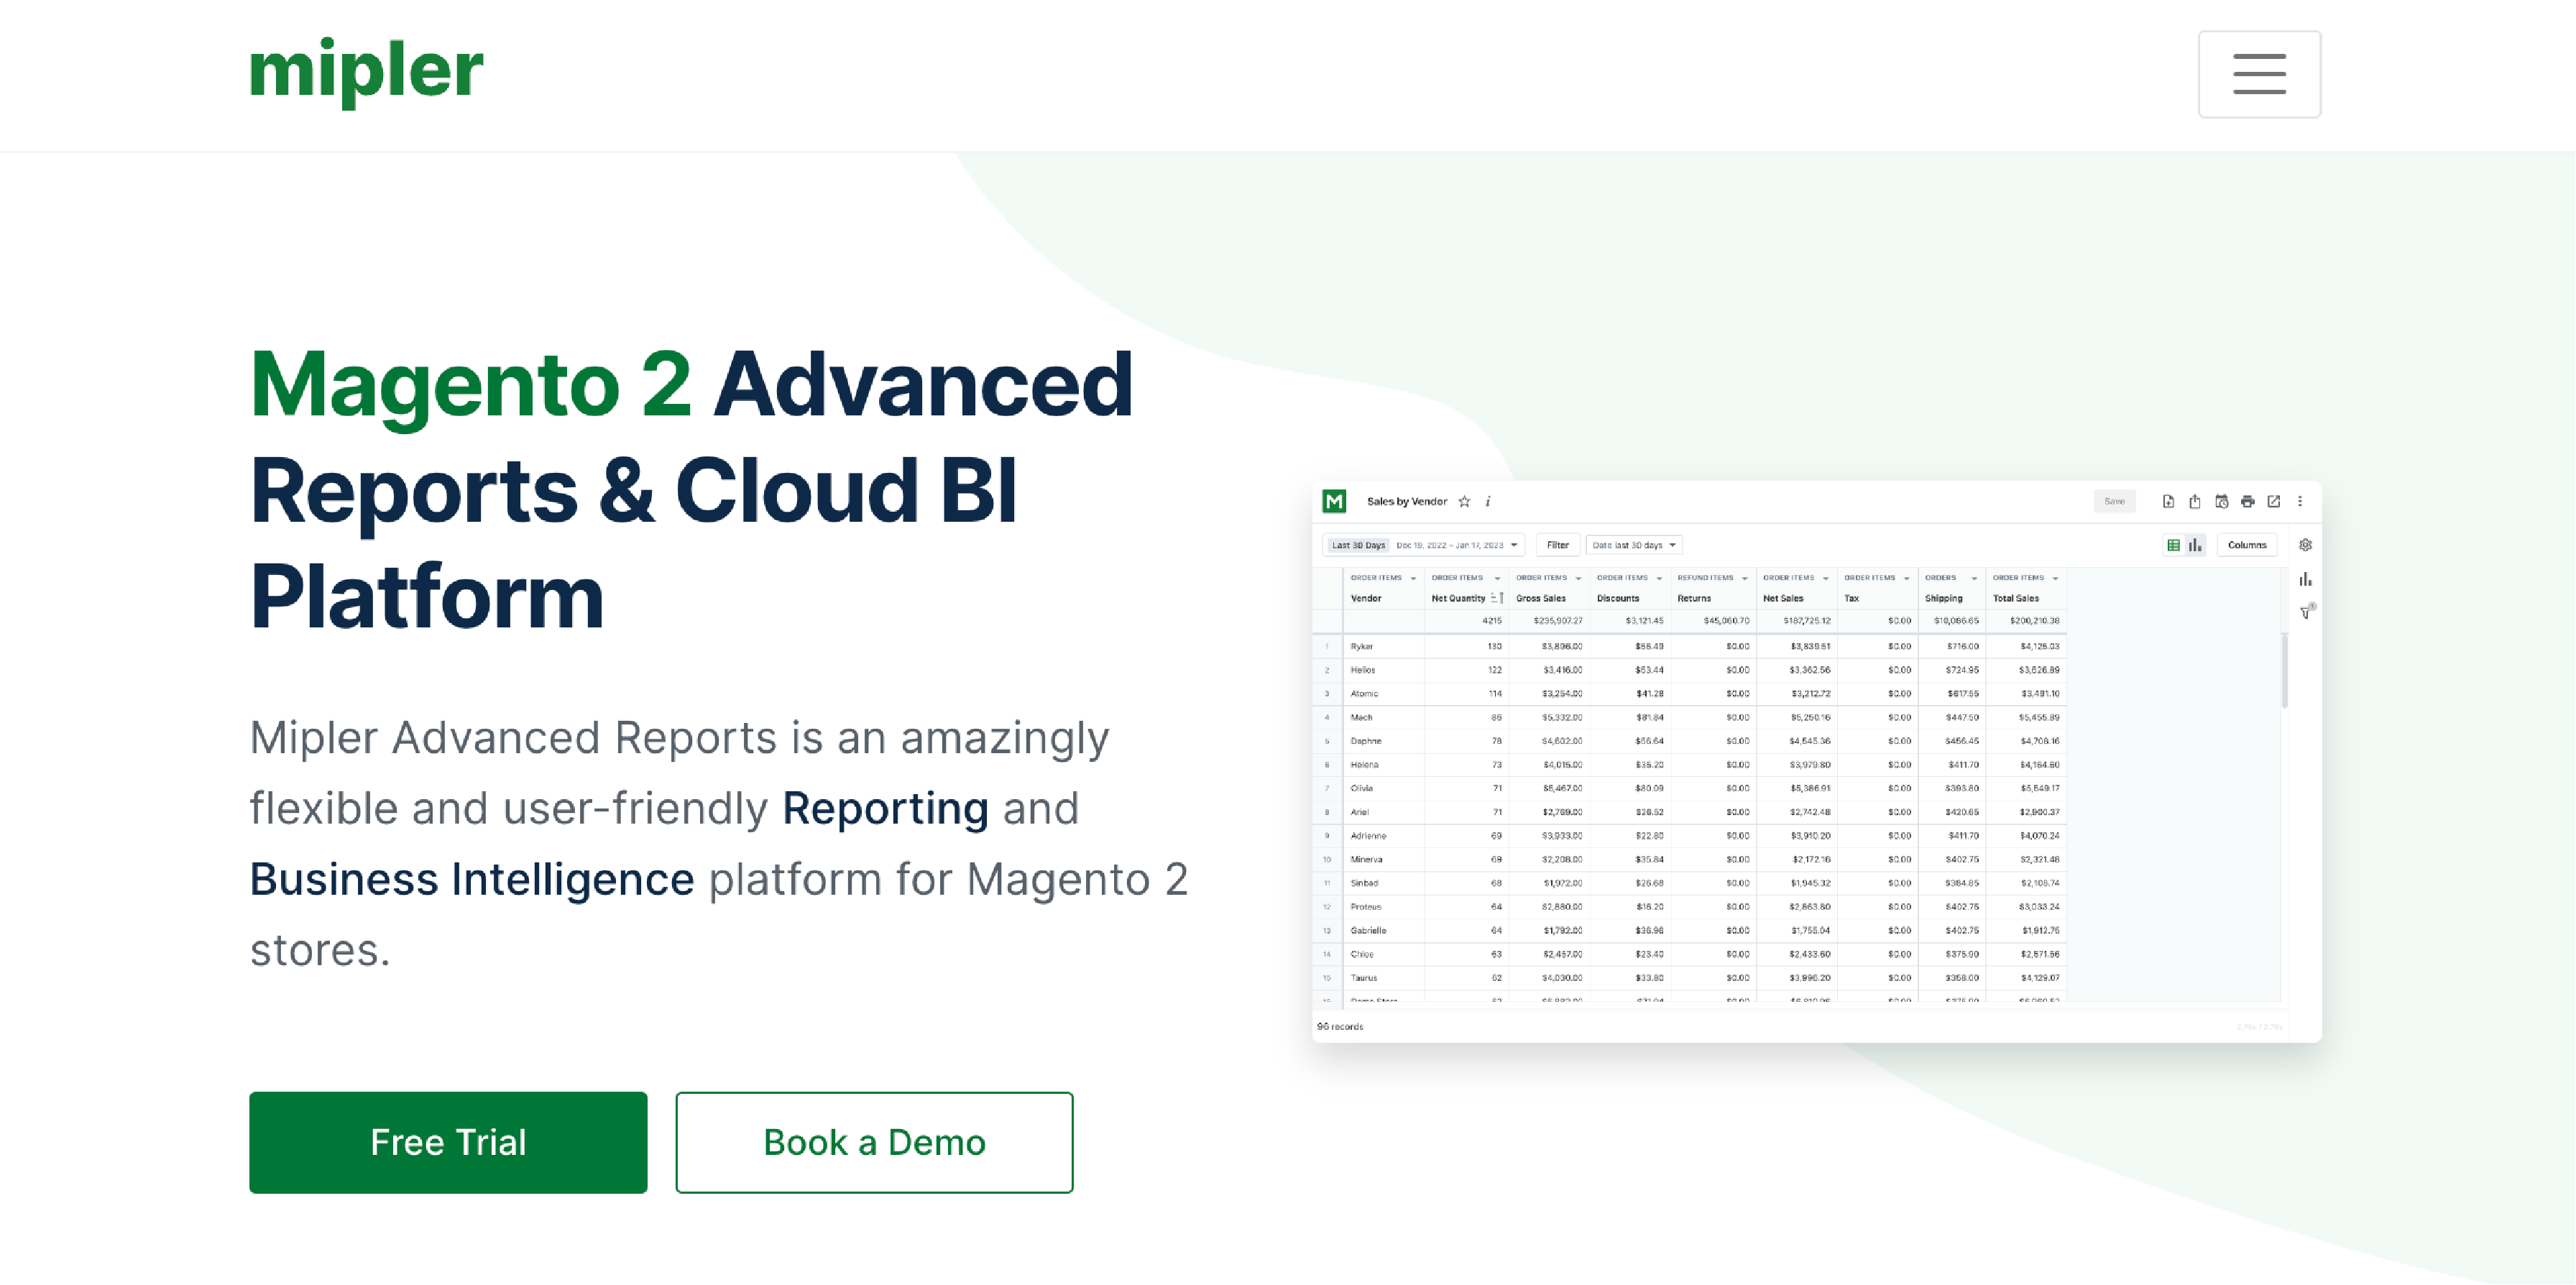 Magento 2 Advanced Reports &amp; Cloud BI Platform by Mipler for comprehensive eCommerce reporting